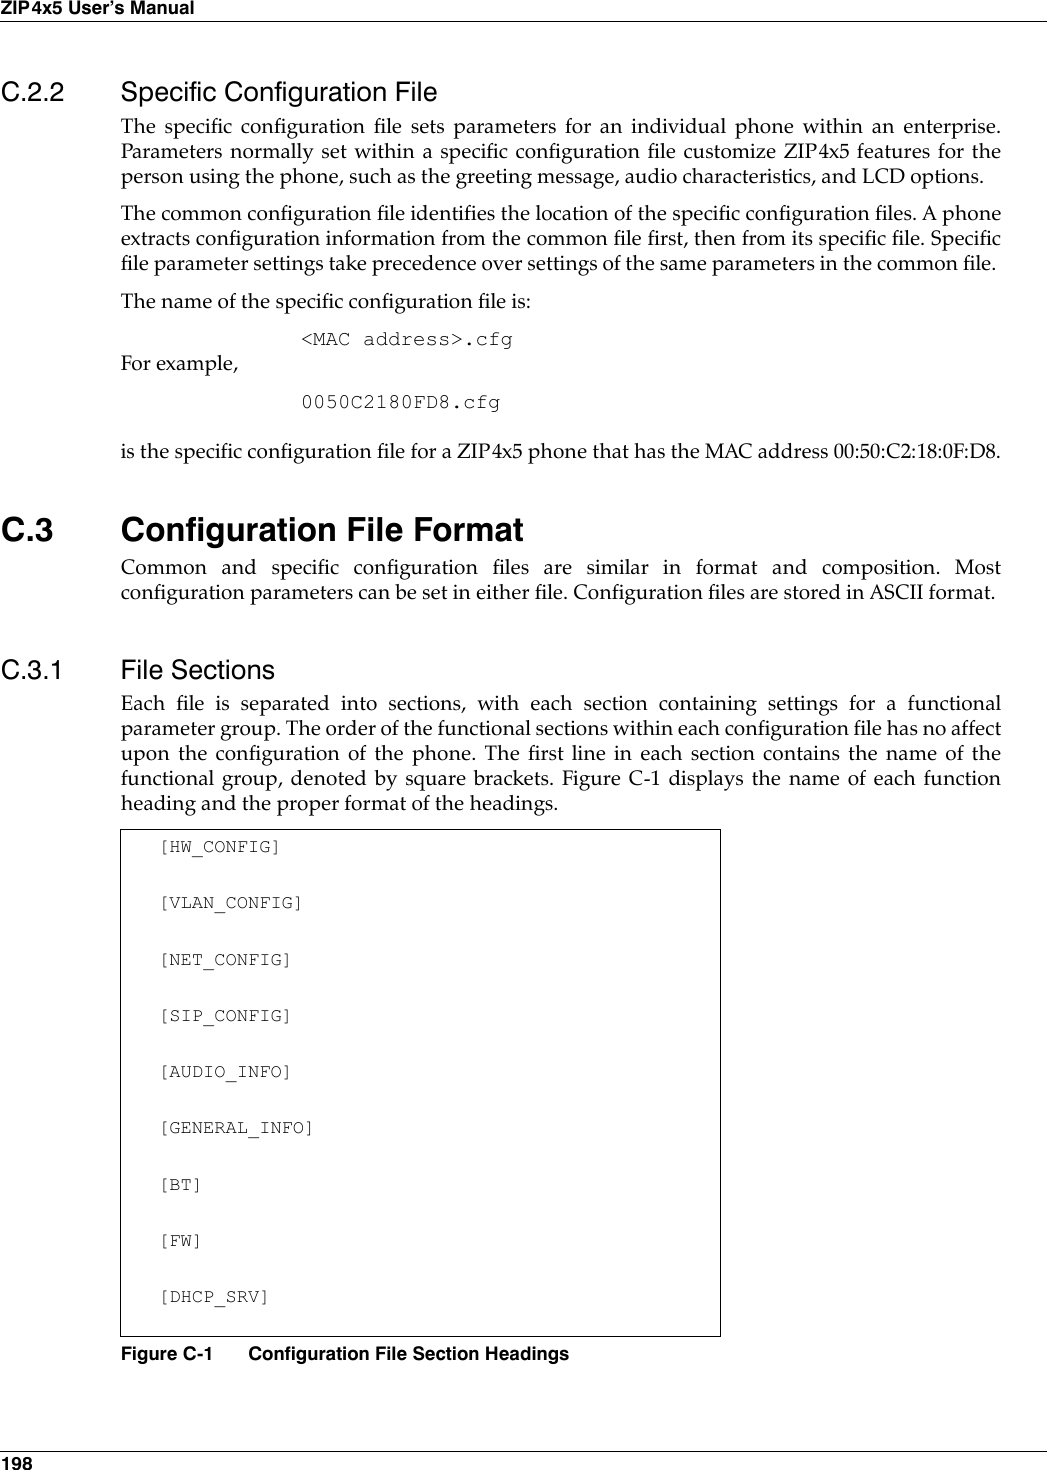 198ZIP4x5 User’s ManualC.2.2 Specific Configuration FileThe specific configuration file sets parameters for an individual phone within an enterprise.Parameters normally set within a specific configuration file customize ZIP4x5 features for theperson using the phone, such as the greeting message, audio characteristics, and LCD options.The common configuration file identifies the location of the specific configuration files. A phoneextracts configuration information from the common file first, then from its specific file. Specificfile parameter settings take precedence over settings of the same parameters in the common file. The name of the specific configuration file is:&lt;MAC address&gt;.cfgFor example,0050C2180FD8.cfgis the specific configuration file for a ZIP4x5 phone that has the MAC address 00:50:C2:18:0F:D8.C.3 Configuration File FormatCommon and specific configuration files are similar in format and composition. Mostconfiguration parameters can be set in either file. Configuration files are stored in ASCII format. C.3.1 File SectionsEach file is separated into sections, with each section containing settings for a functionalparameter group. The order of the functional sections within each configuration file has no affectupon the configuration of the phone. The first line in each section contains the name of thefunctional group, denoted by square brackets. Figure C-1 displays the name of each functionheading and the proper format of the headings.[HW_CONFIG][VLAN_CONFIG][NET_CONFIG][SIP_CONFIG][AUDIO_INFO][GENERAL_INFO][BT][FW][DHCP_SRV]Figure C-1 Configuration File Section Headings